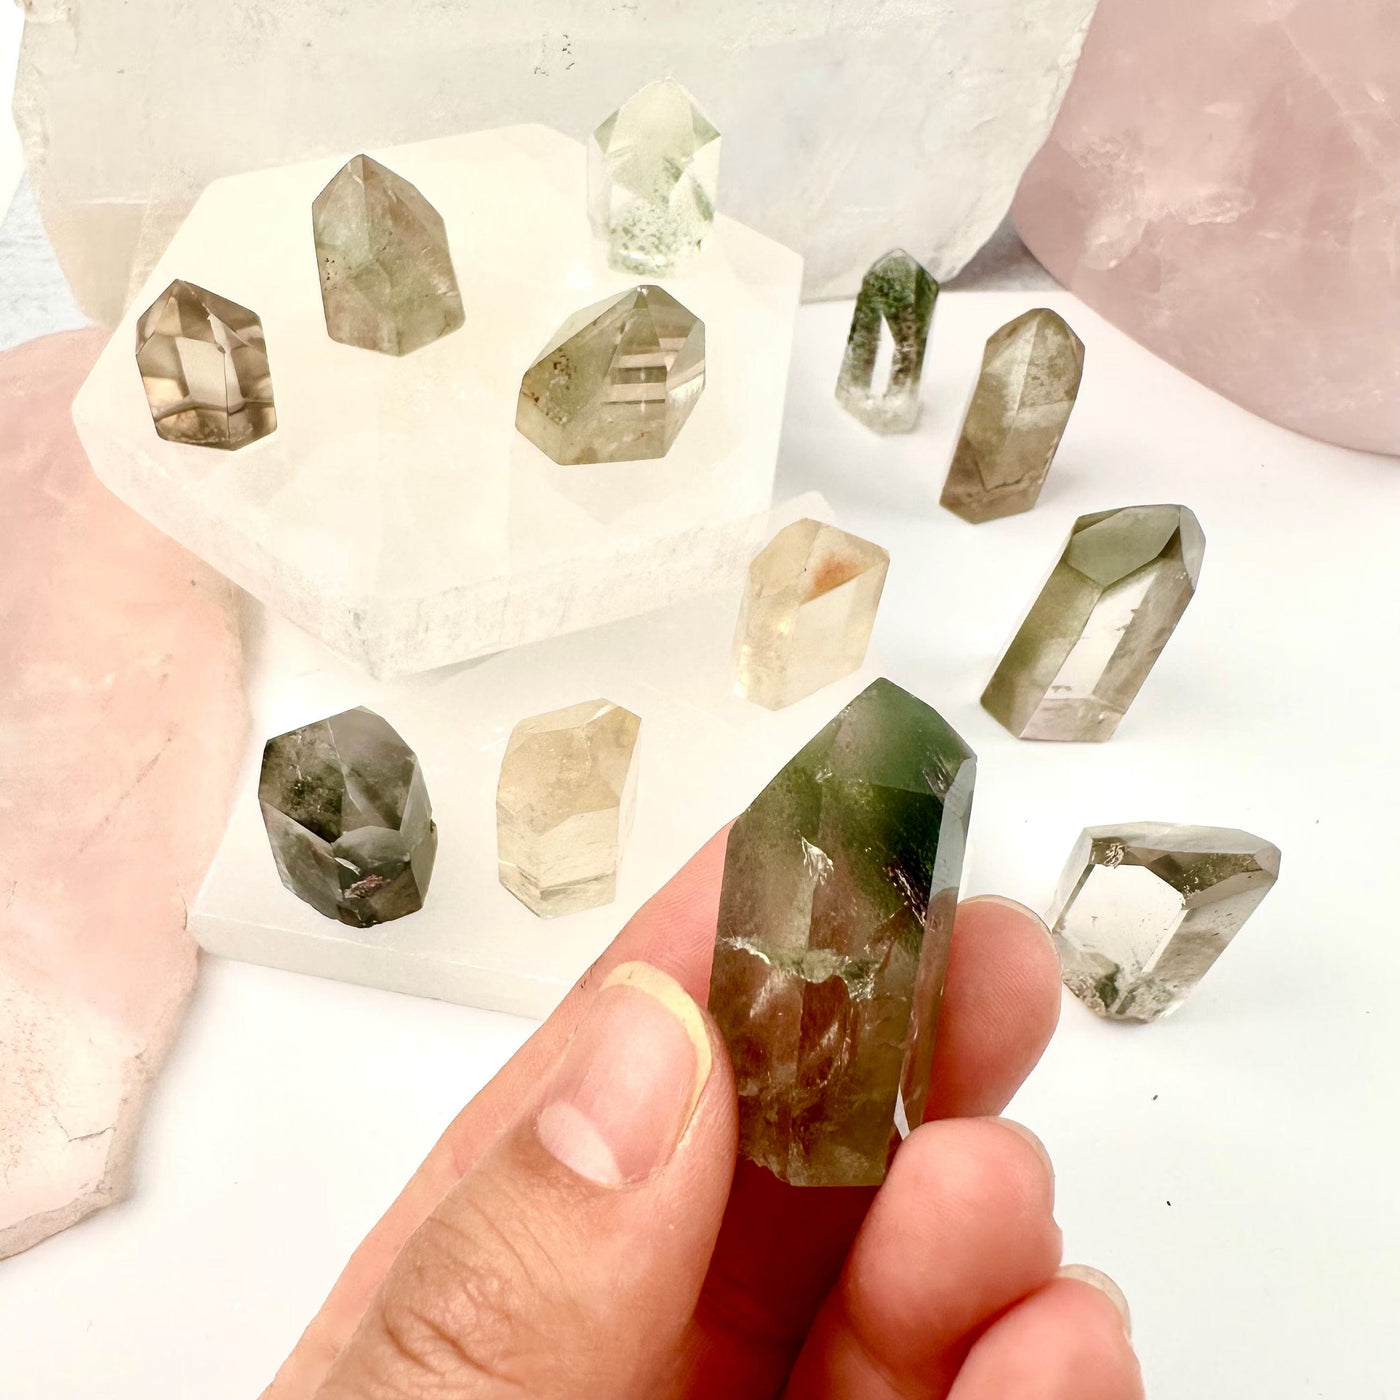 Crystal Quartz Points with Inclusions - Small Crystals - You Choose variant 8 in hand for size reference with other points in the background